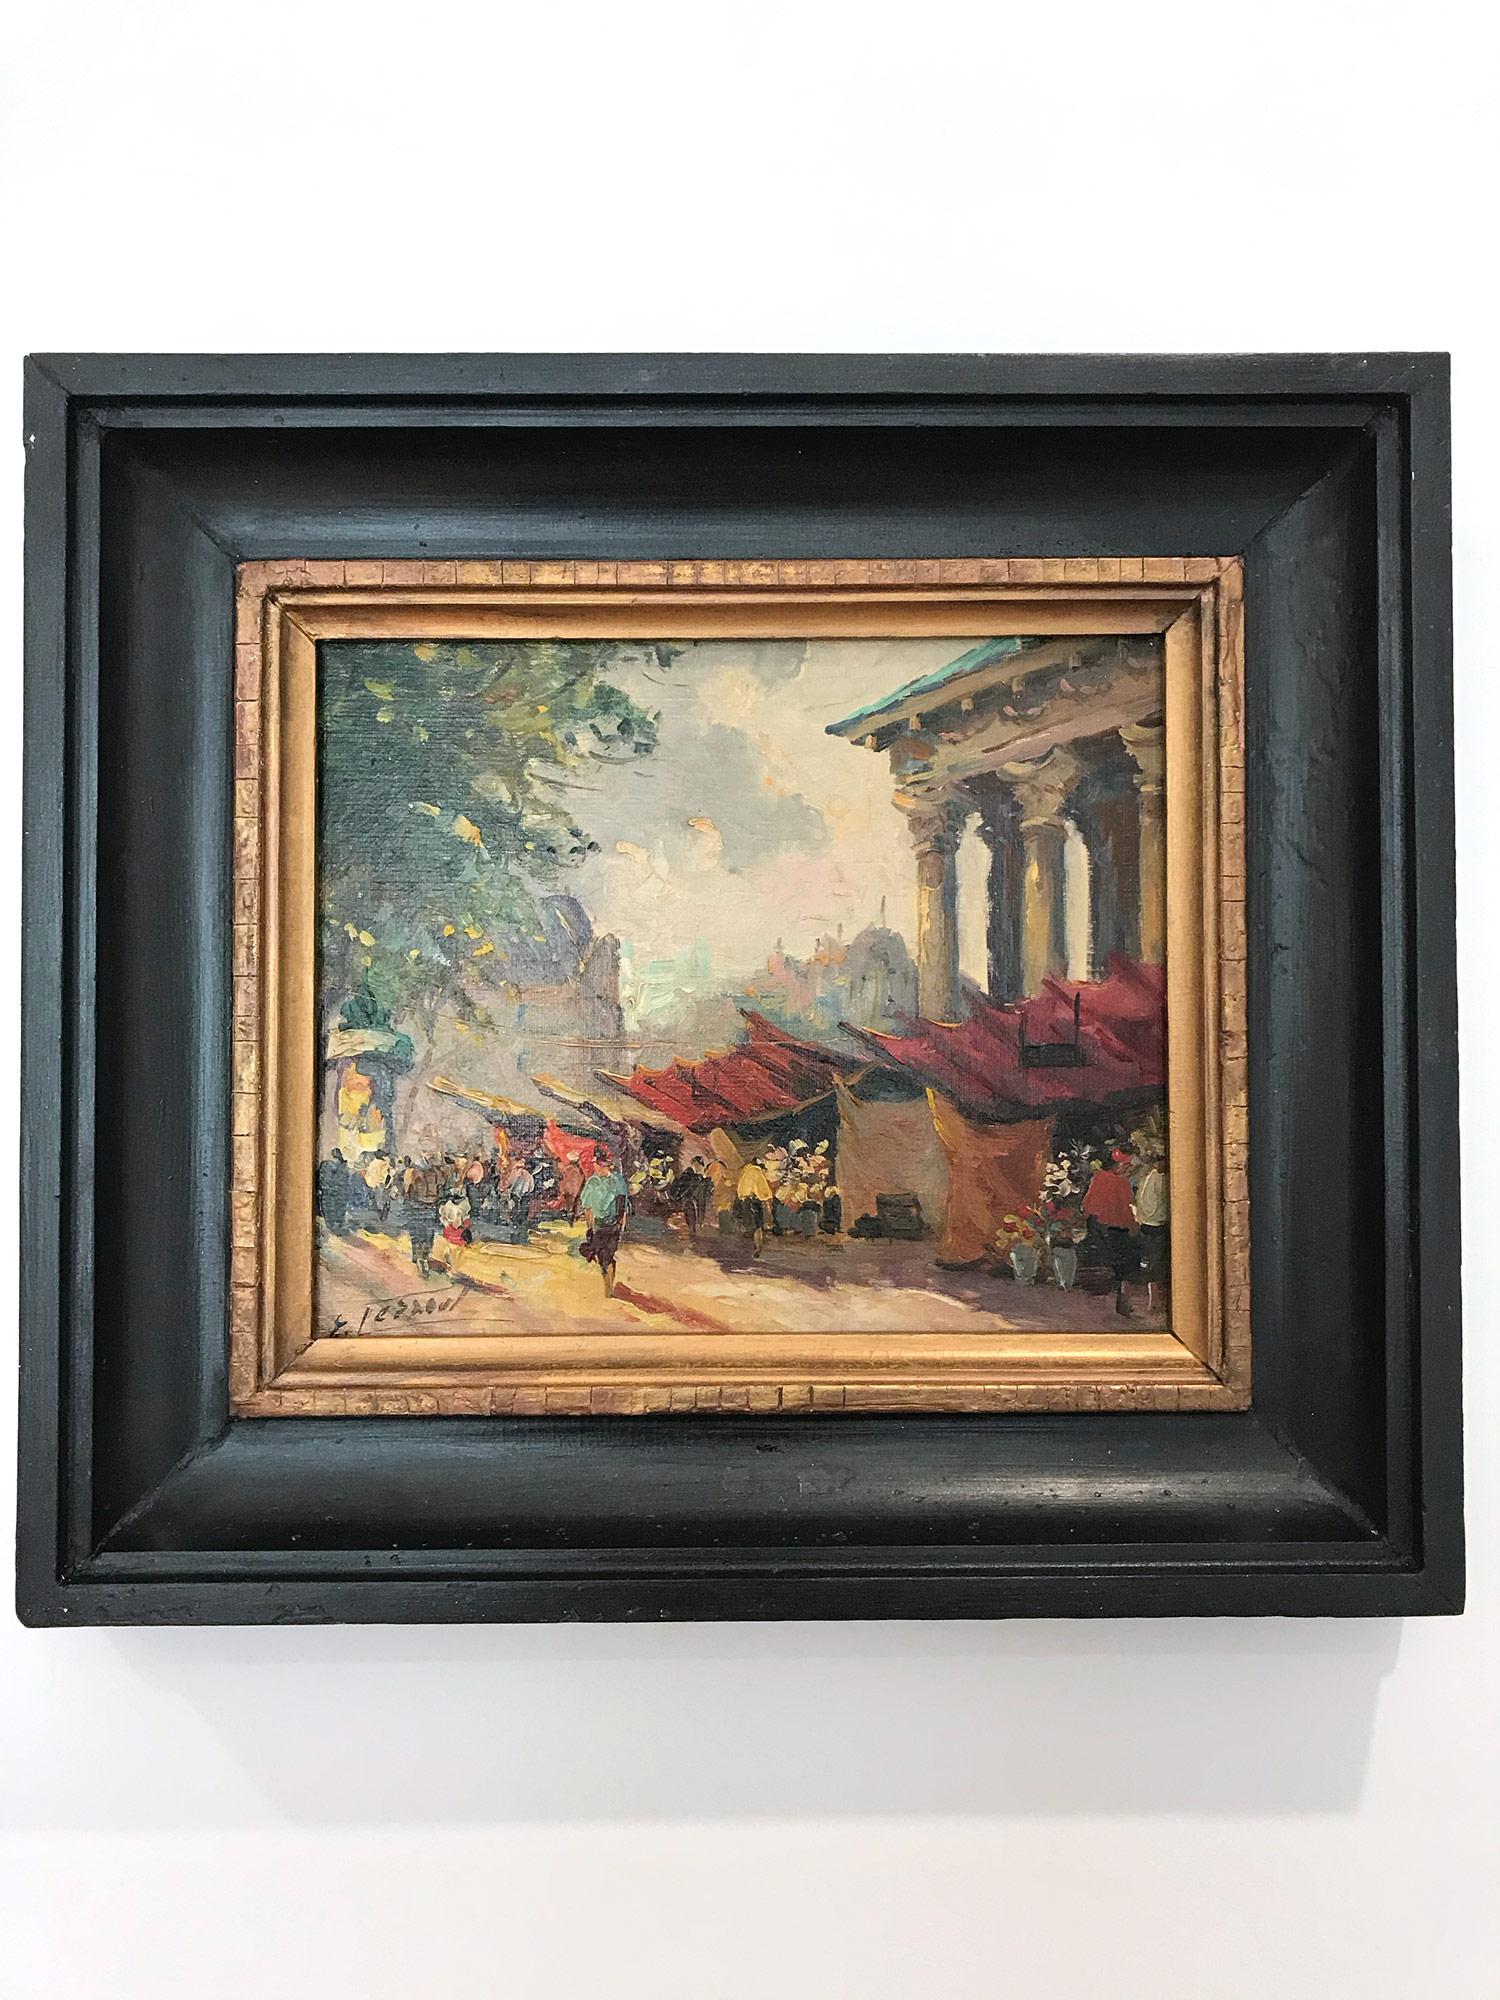 This captivating Parisian CityScape scene from the 20th Centruy is a wonderful display of Emile Le Saout's true passion for outdoor genre paintings. The vibrant colors and impressionistic brushwork is done with both whimsey and boldness. The flower